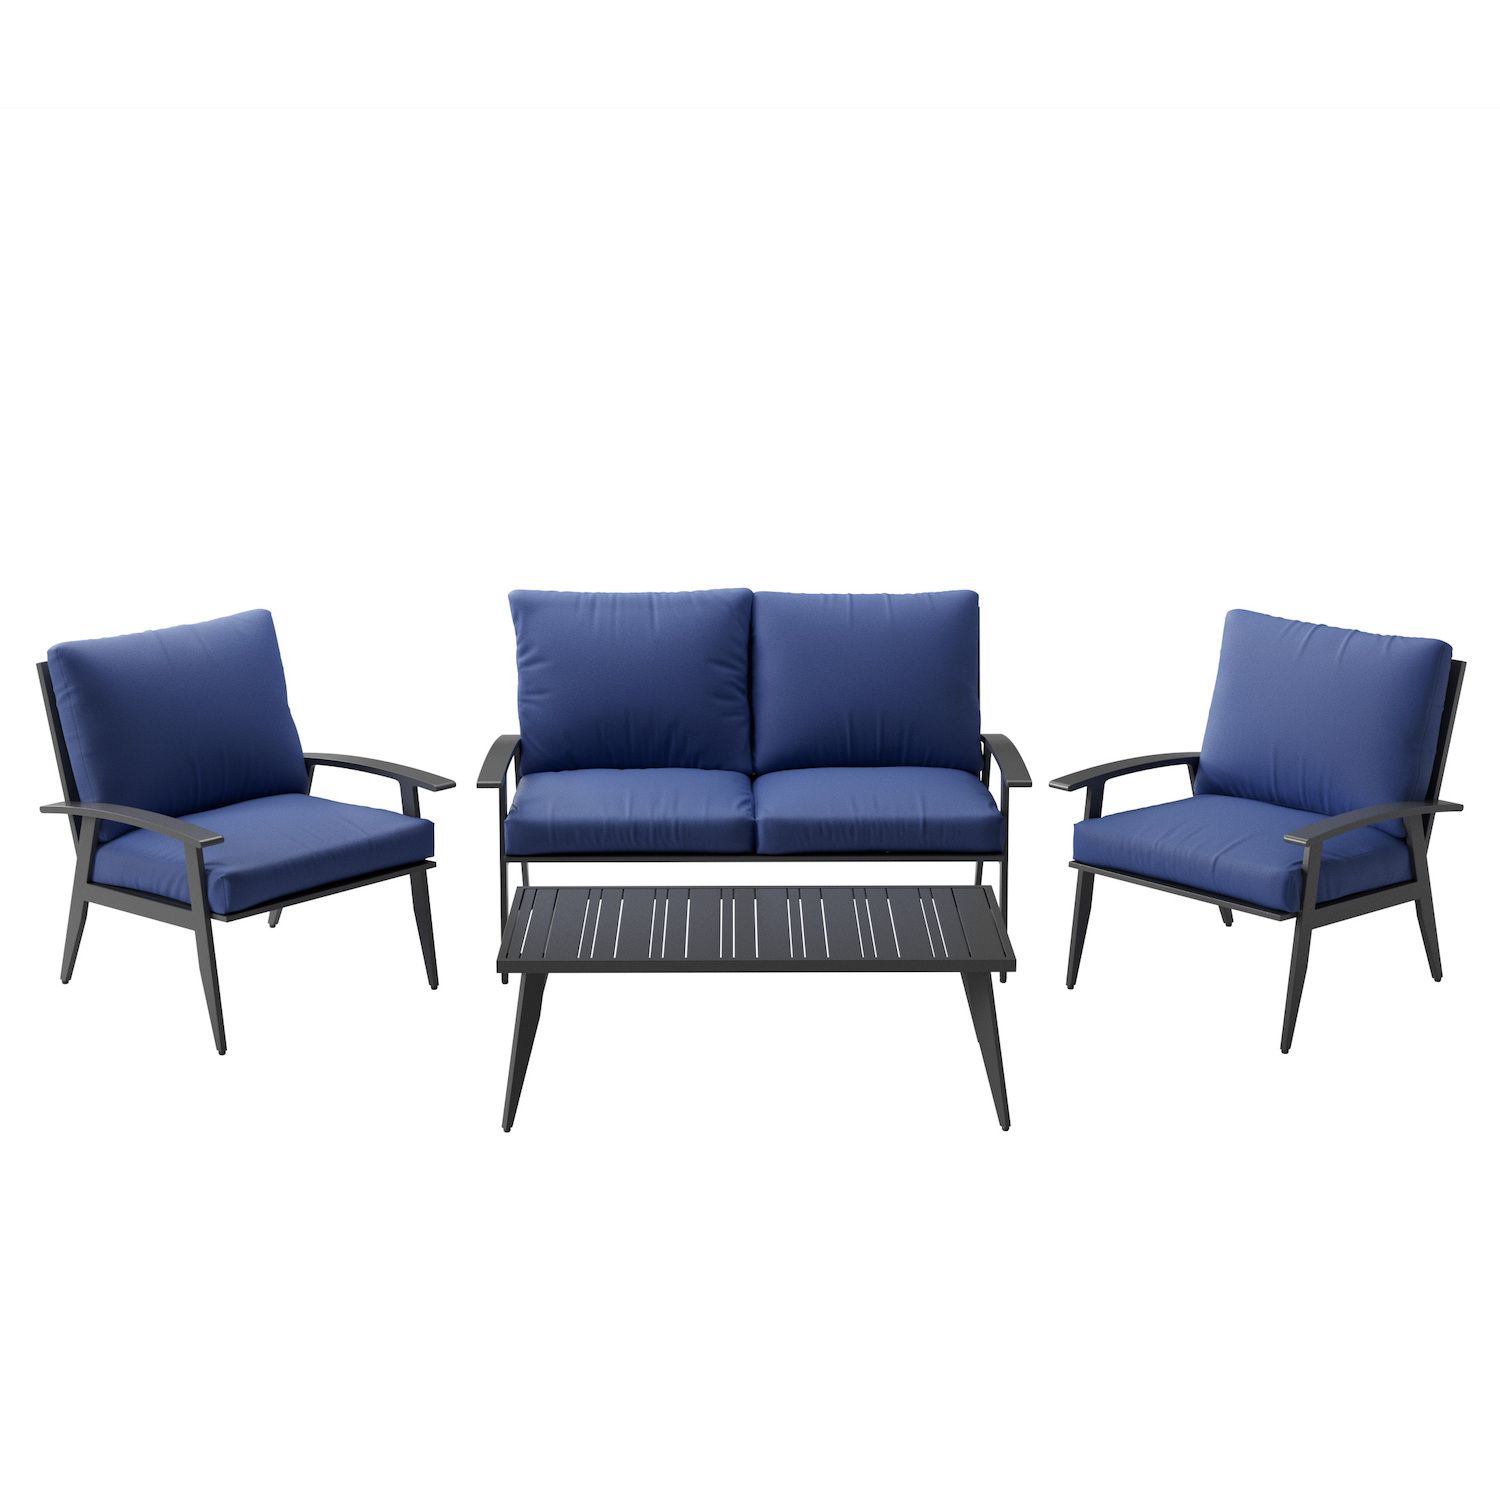 Image for Dream Collection Outdoor Conversation Chair, Loveseat, & Coffee Table 4-piece Set at Kohl's.